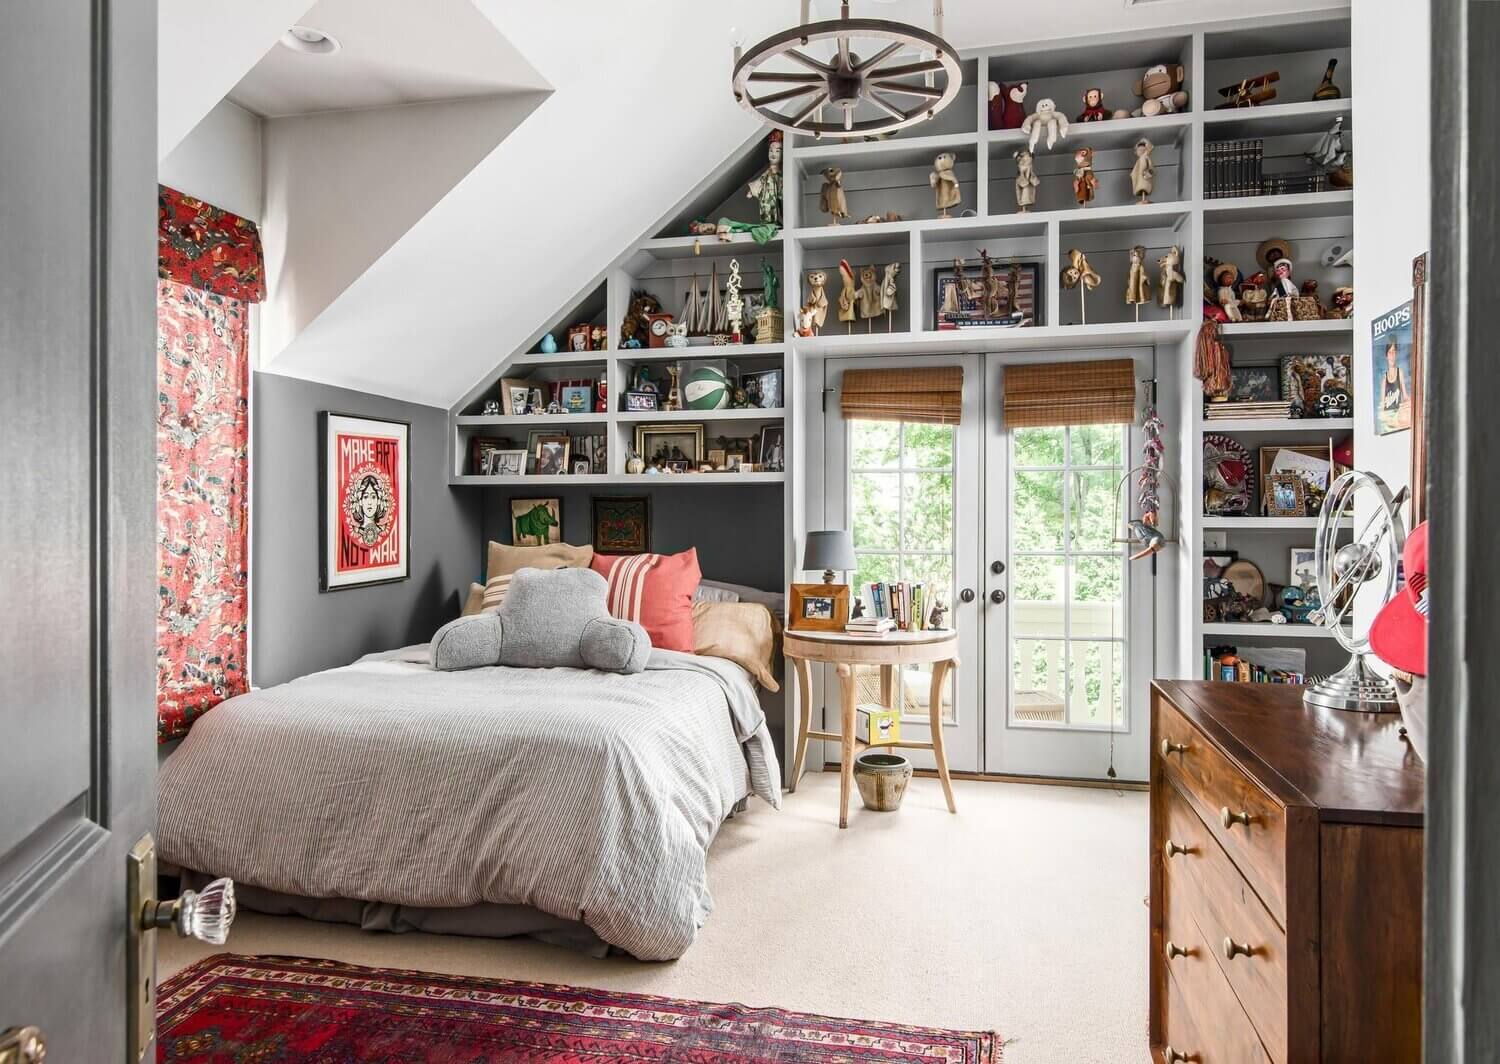 louisa pierce vintage eclectic nashville home for sale nordroom25 How To Decorate A Bedroom with A Slanted Ceiling